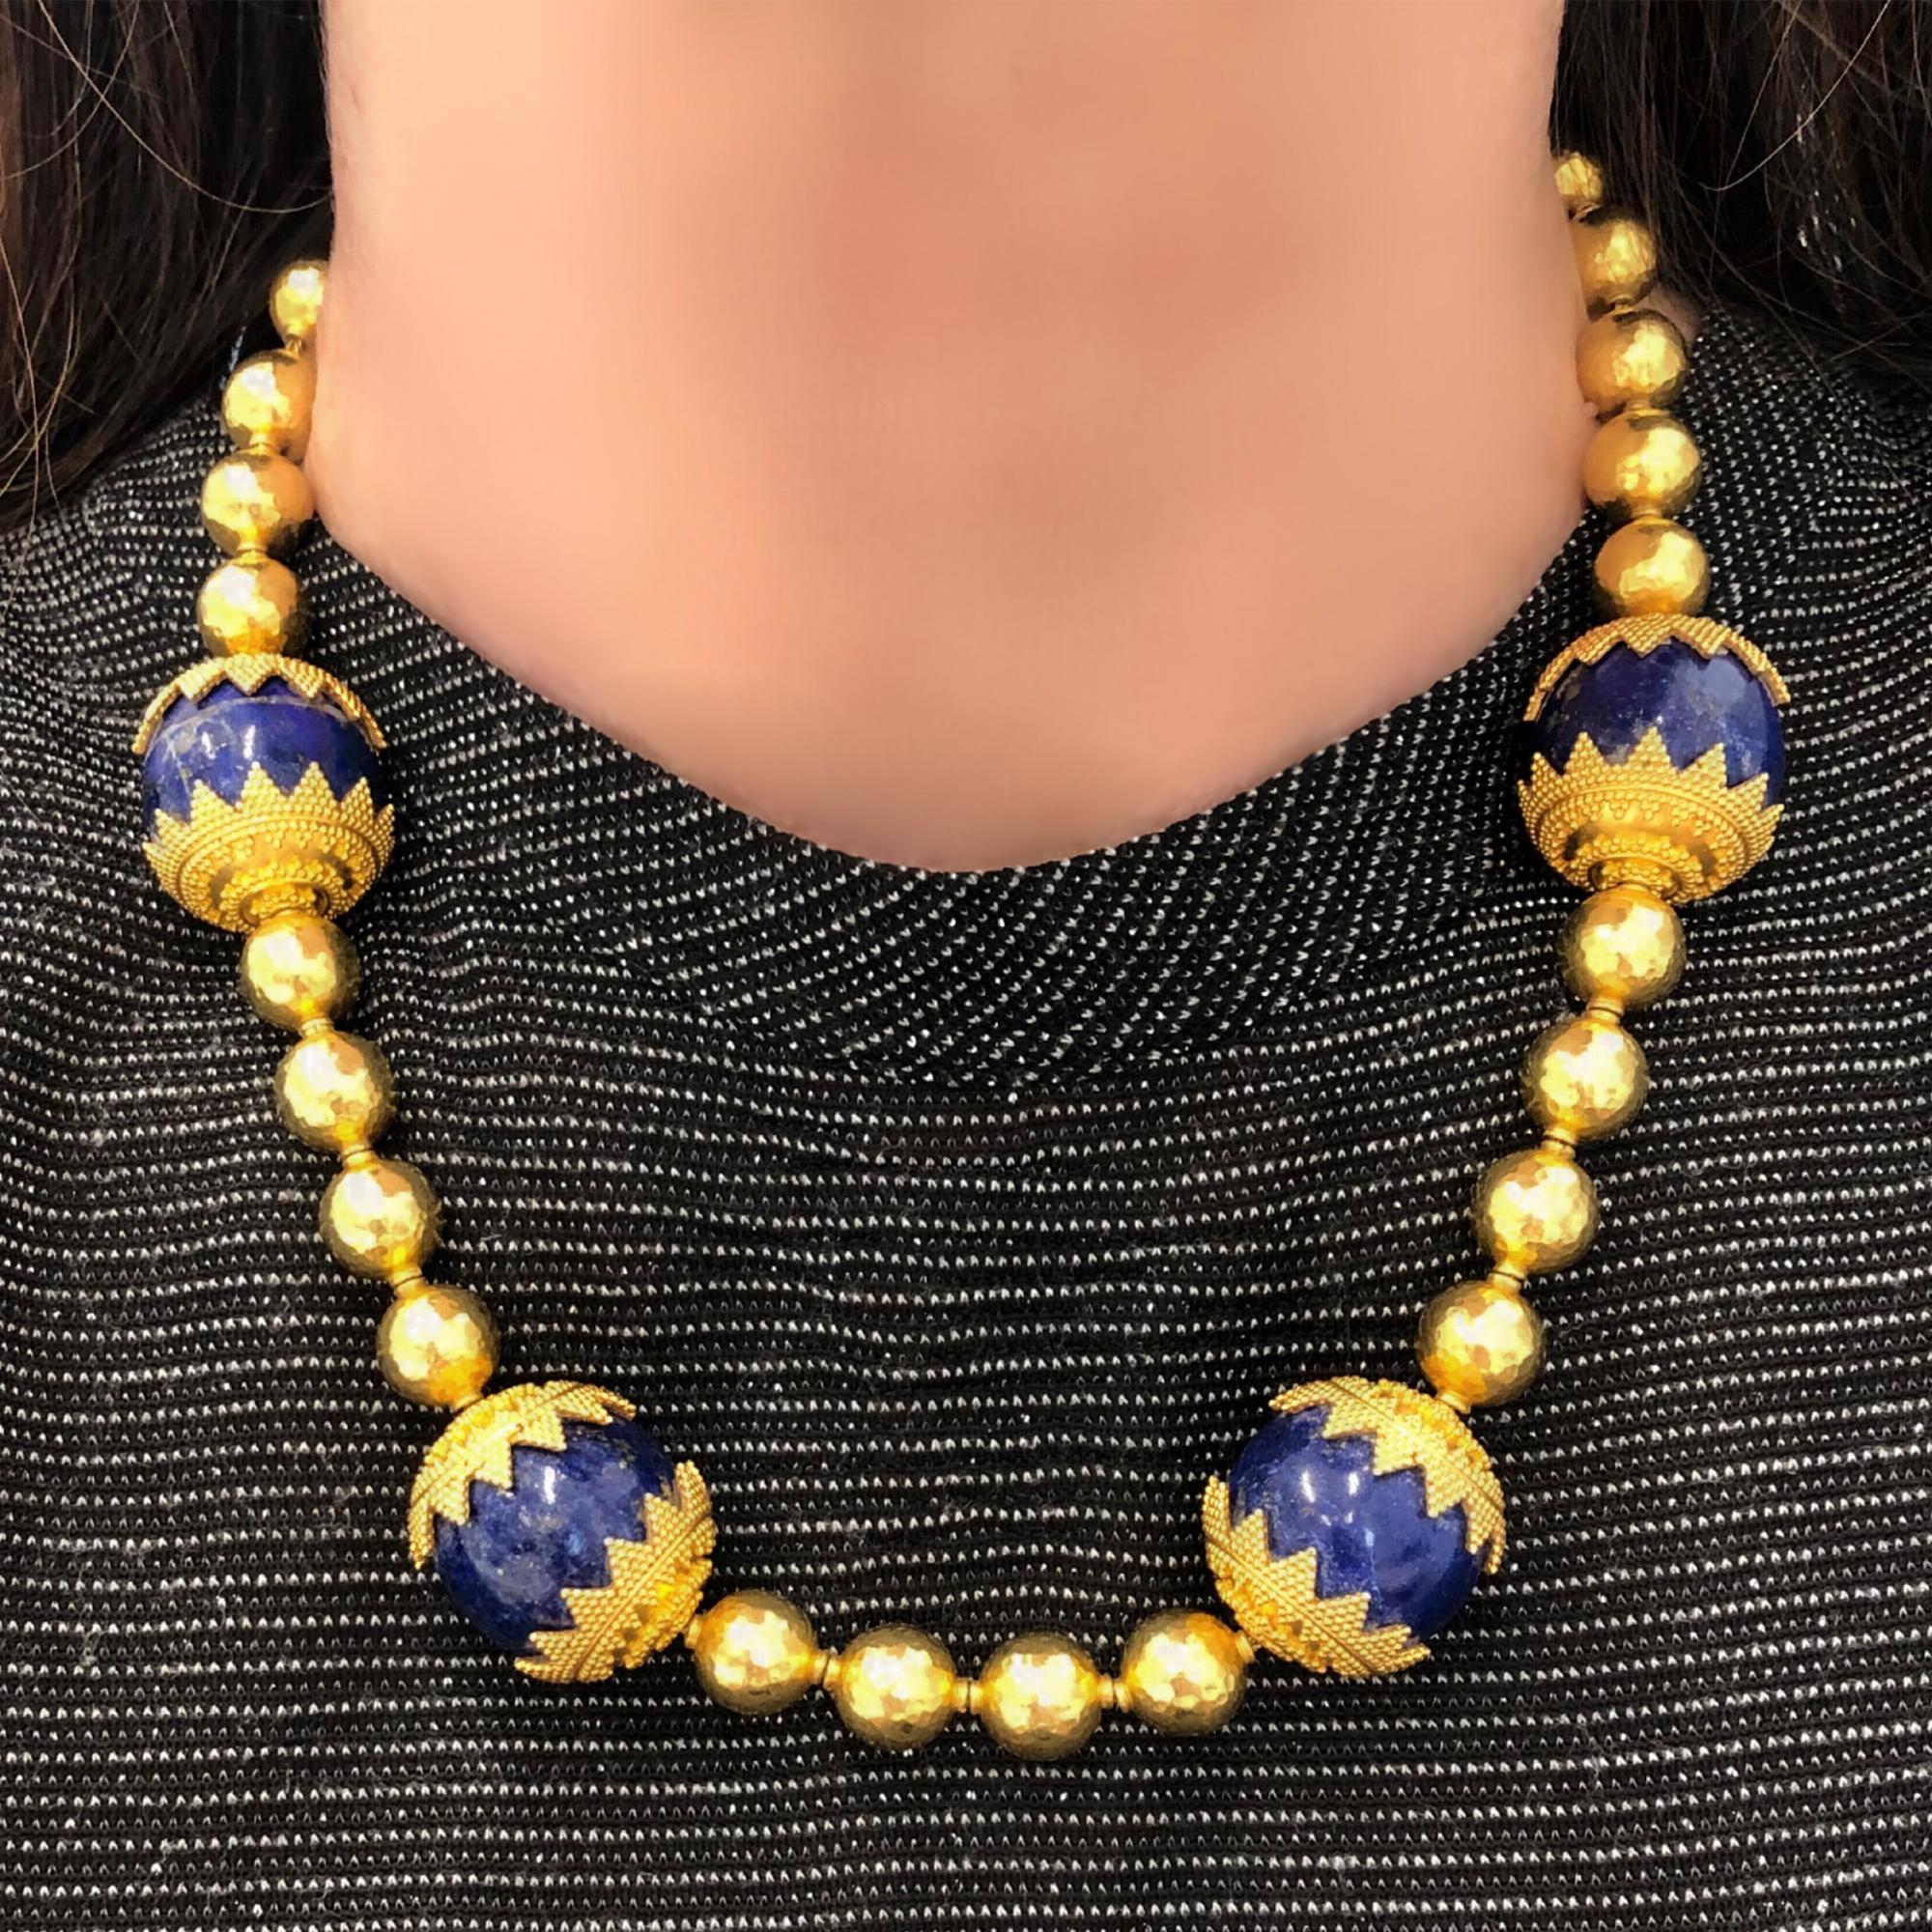 Women's or Men's High Karat Gold Necklace with Lapis Lazuli Beads CA 1970 For Sale